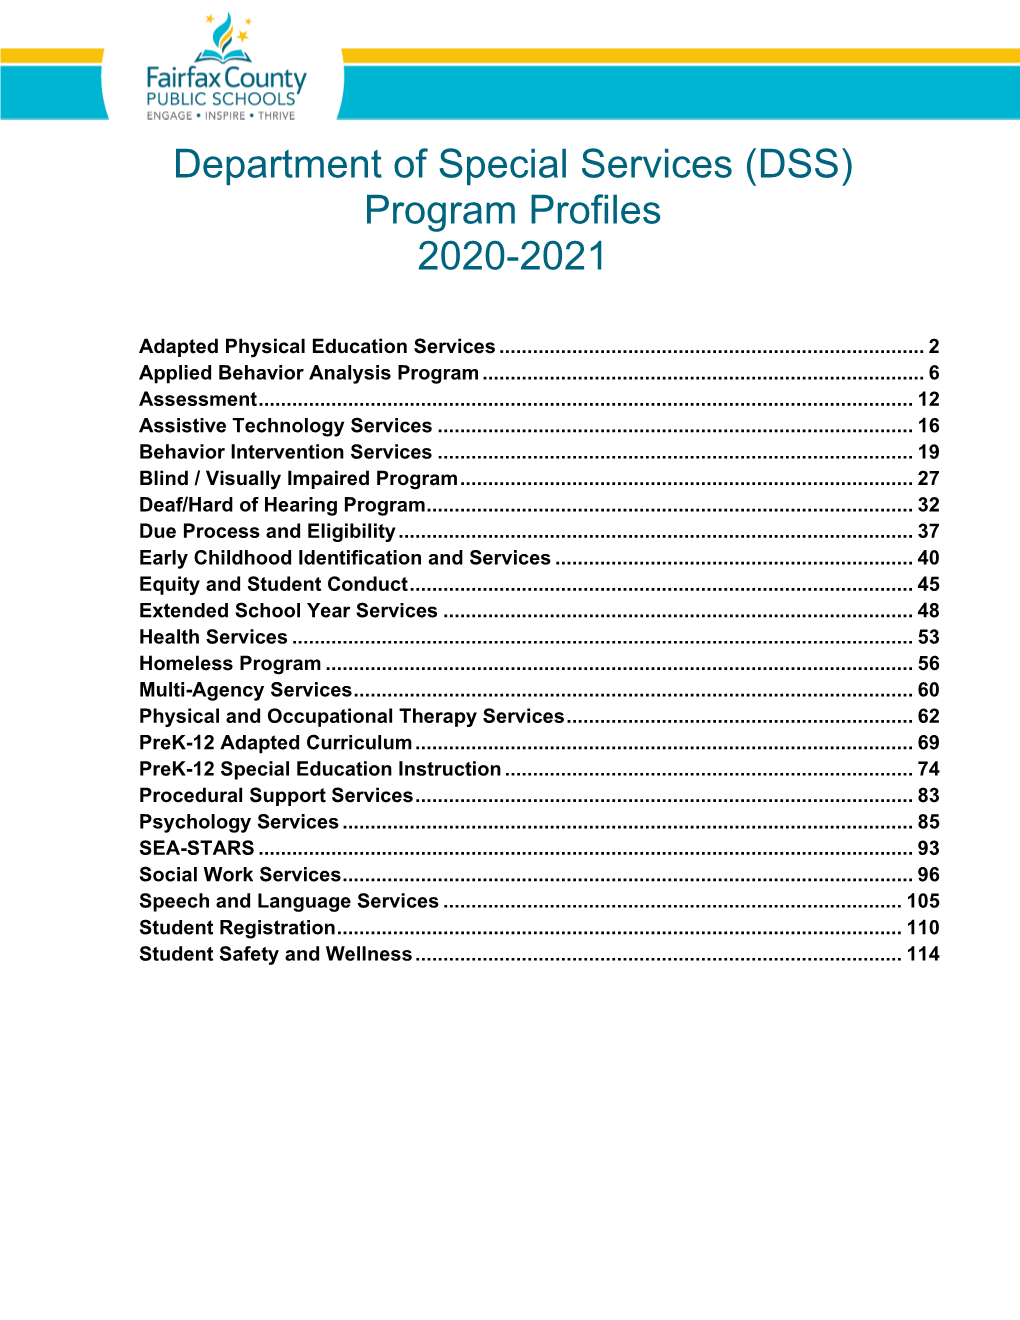 Department of Special Services (DSS) Program Profiles 2020-2021